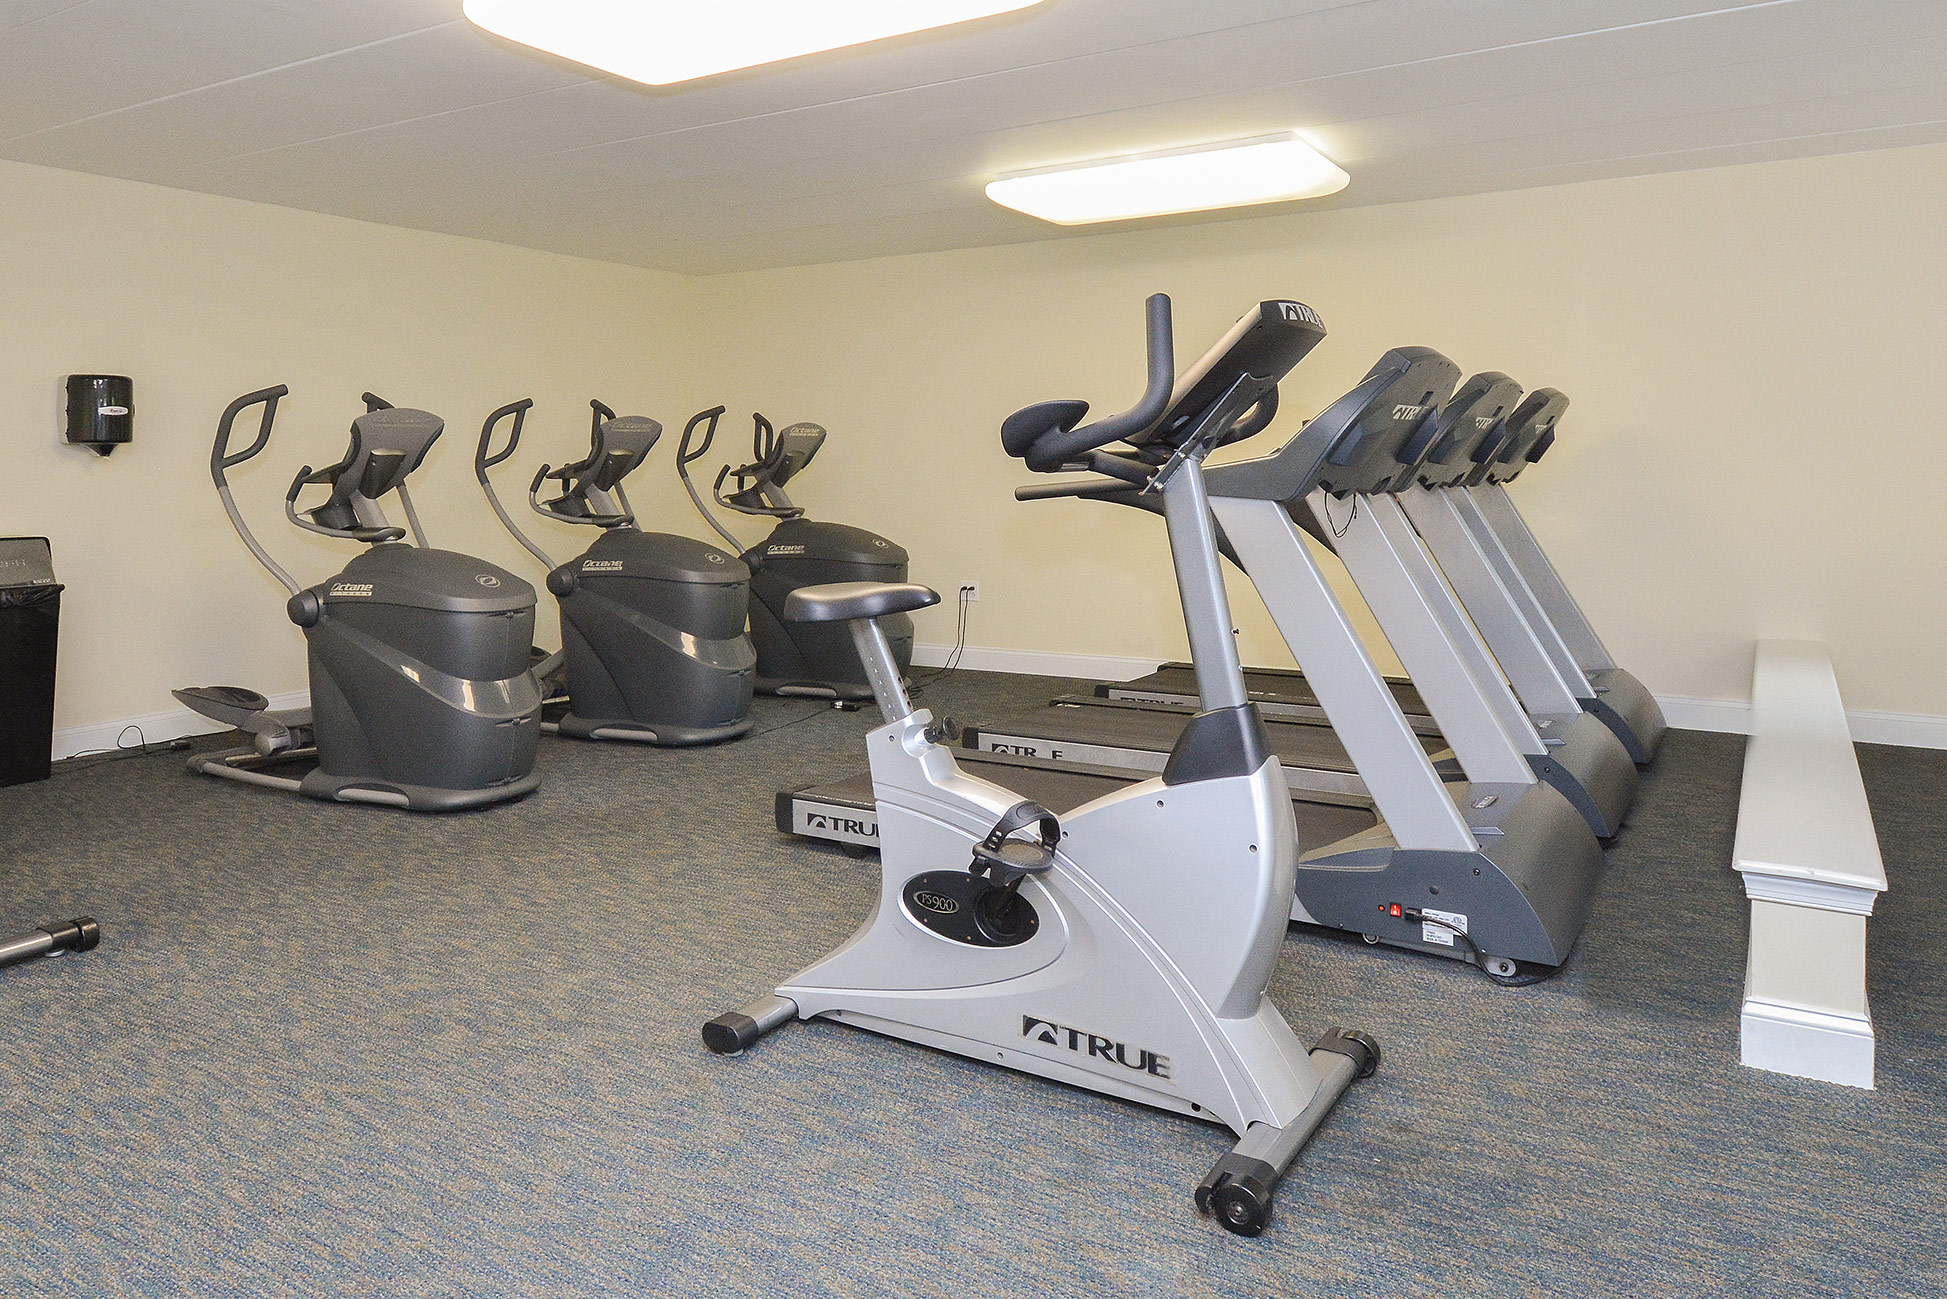 Fitness center area of our community, fitted with fitness machines, soft flooring, and a high ceiling